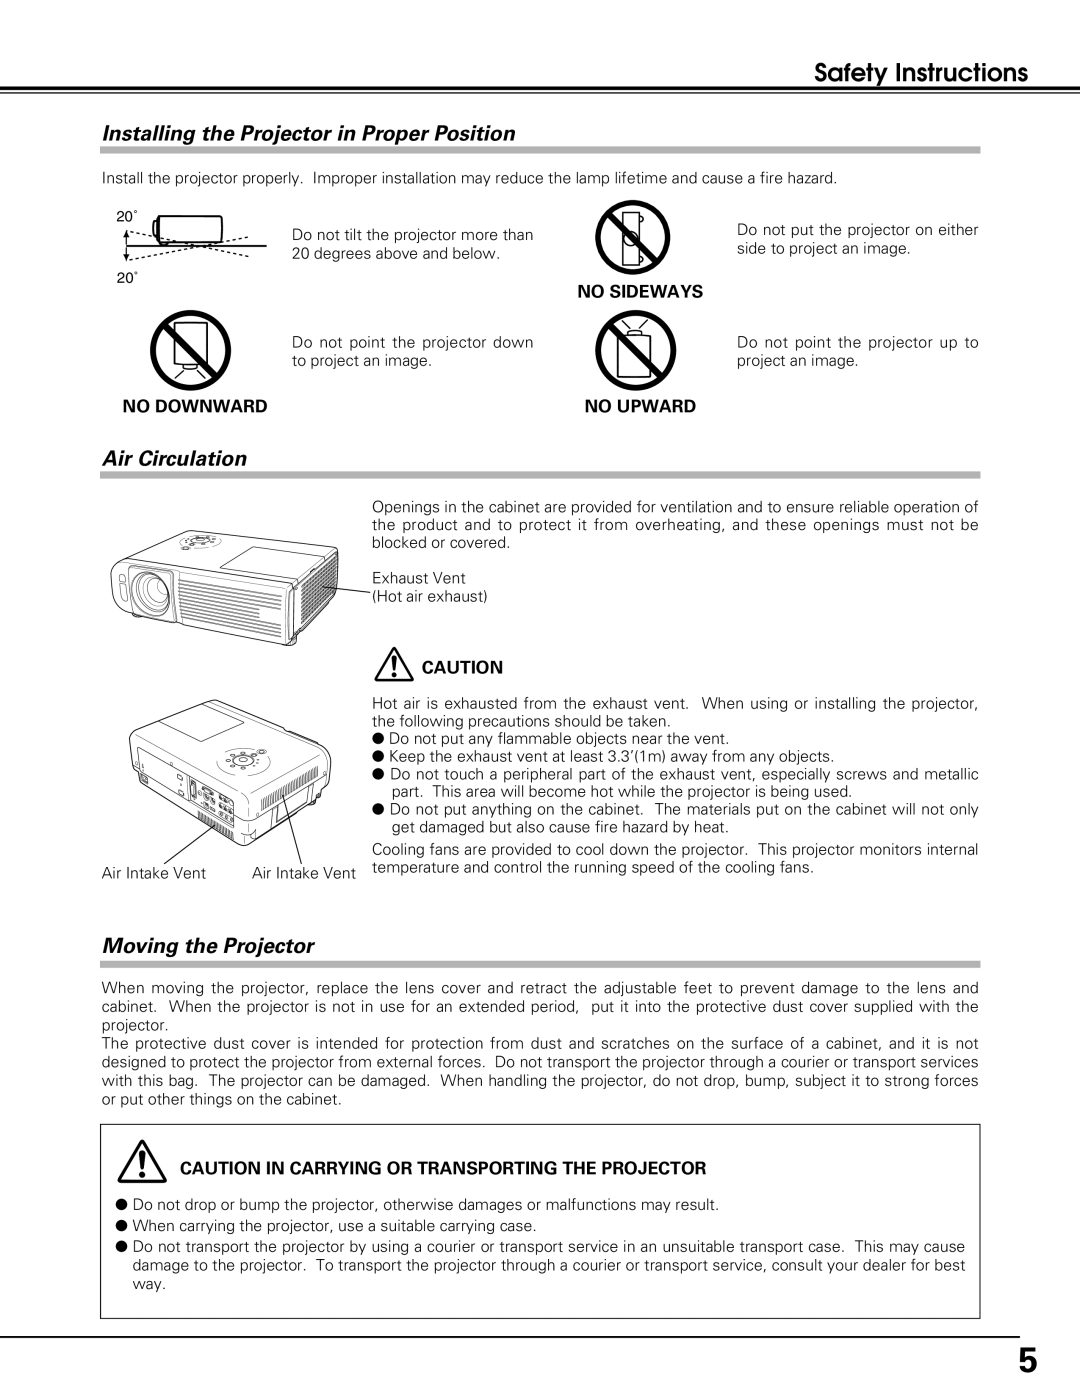 Eiki LC-XE10 Safety Instructions, Installing the Projector in Proper Position, Air Circulation, Moving the Projector 